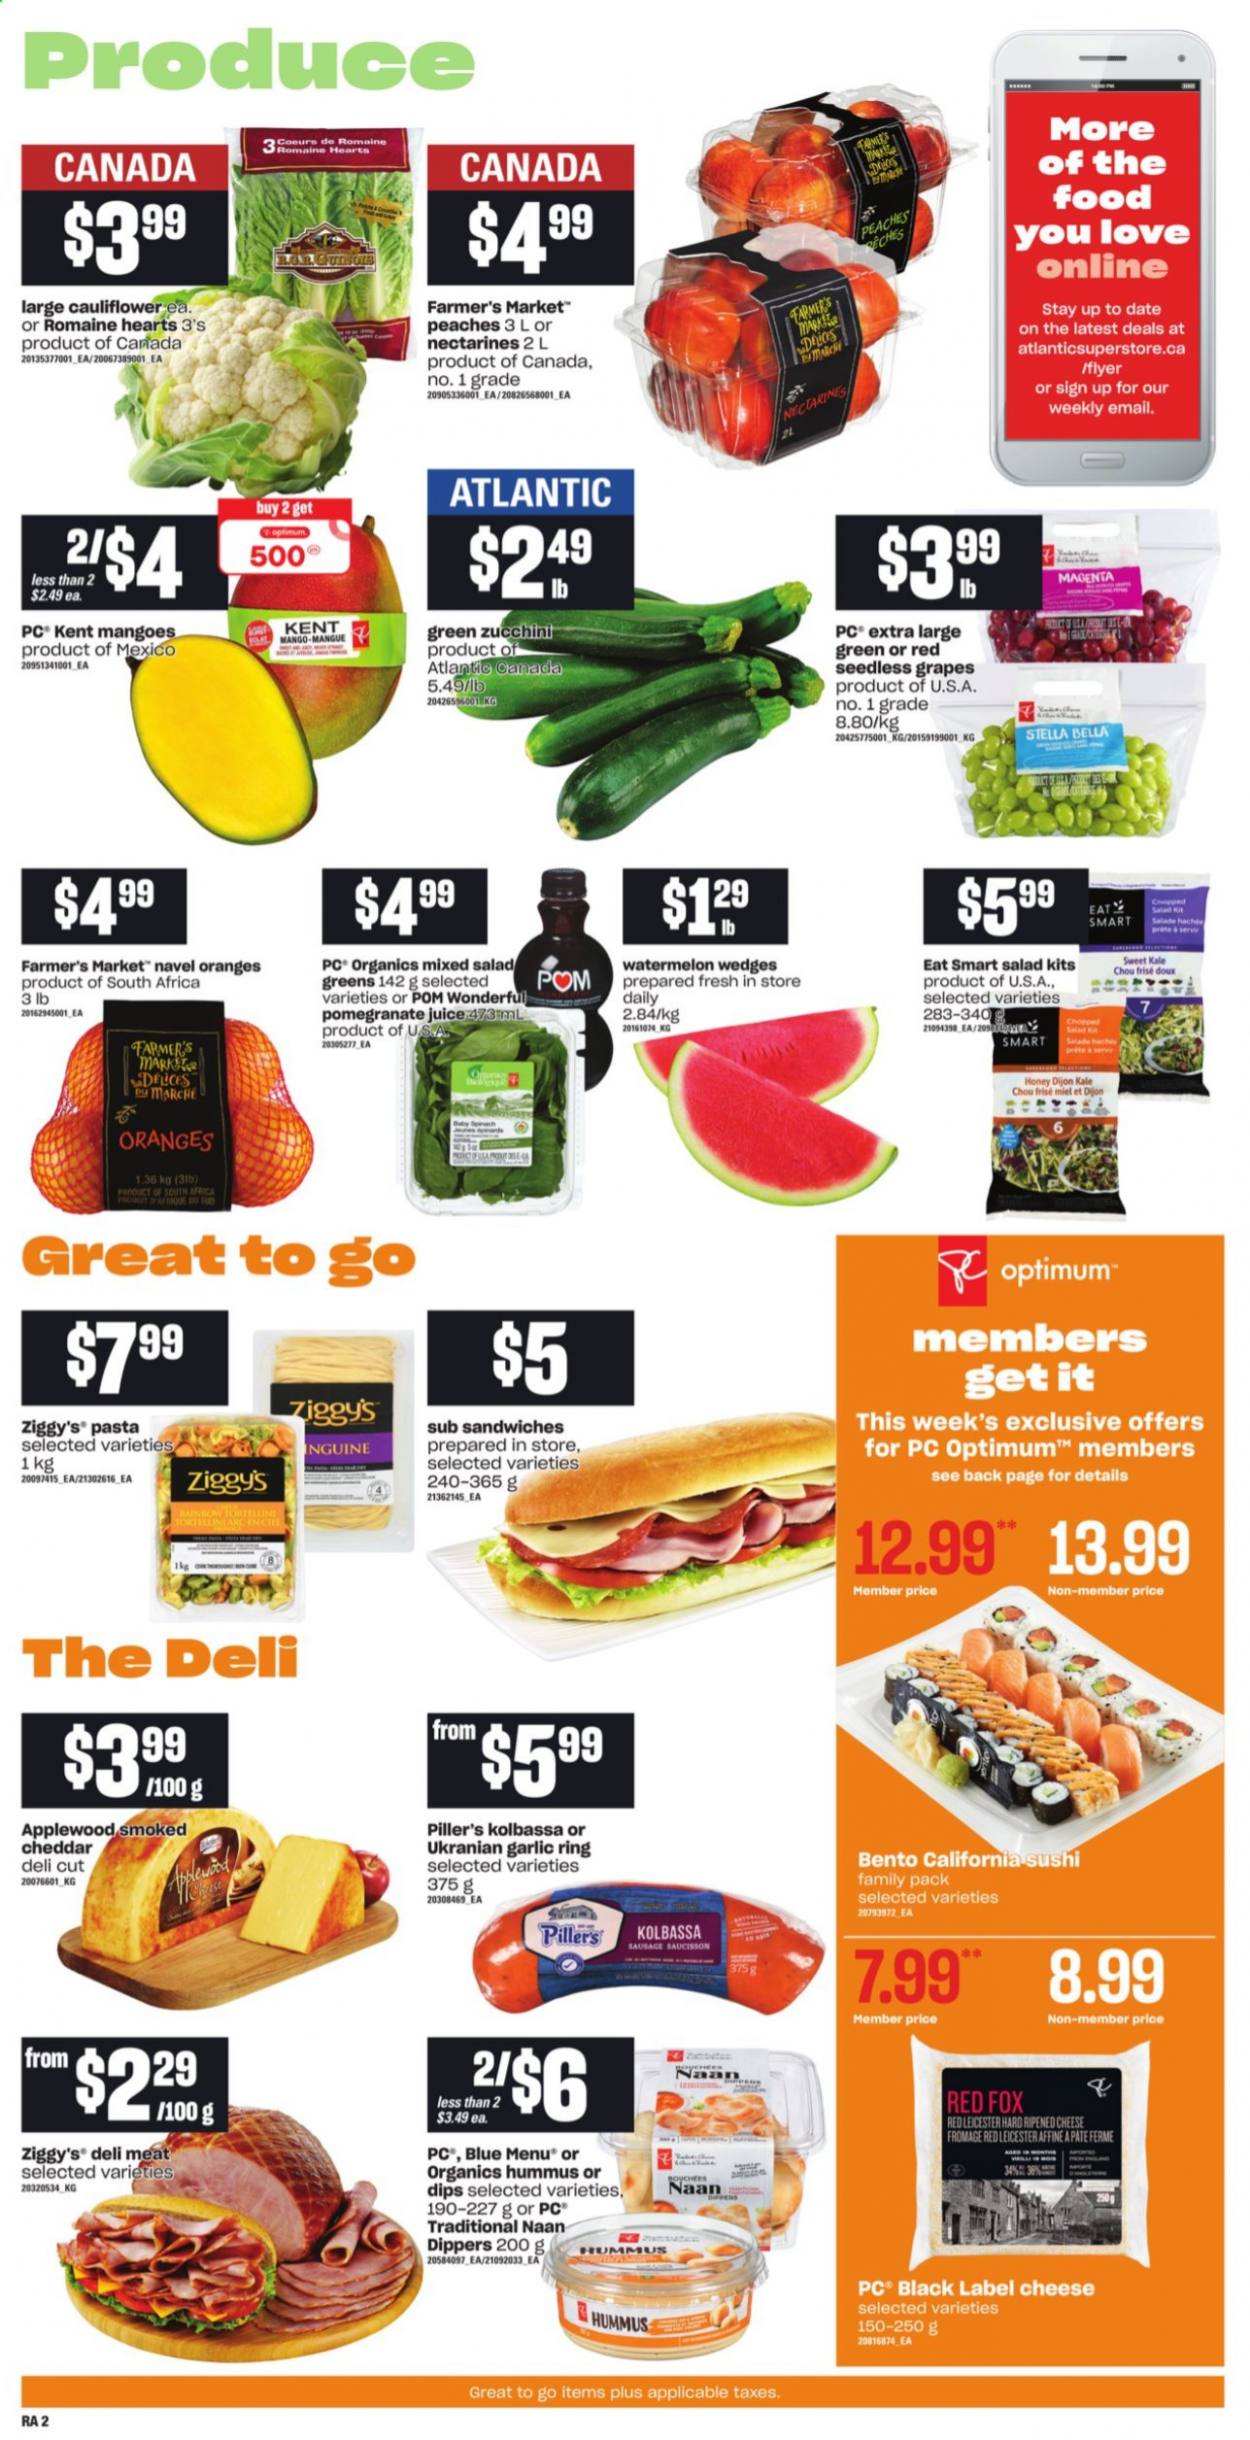 thumbnail - Atlantic Superstore Flyer - August 19, 2021 - August 25, 2021 - Sales products - Bella, cauliflower, garlic, zucchini, kale, salad, chopped salad, grapes, mango, nectarines, seedless grapes, watermelon, pomegranate, peaches, navel oranges, sandwich, pasta, sausage, hummus, Red Leicester, cheddar, cheese, honey, juice, L'Or, Optimum, salad greens. Page 3.